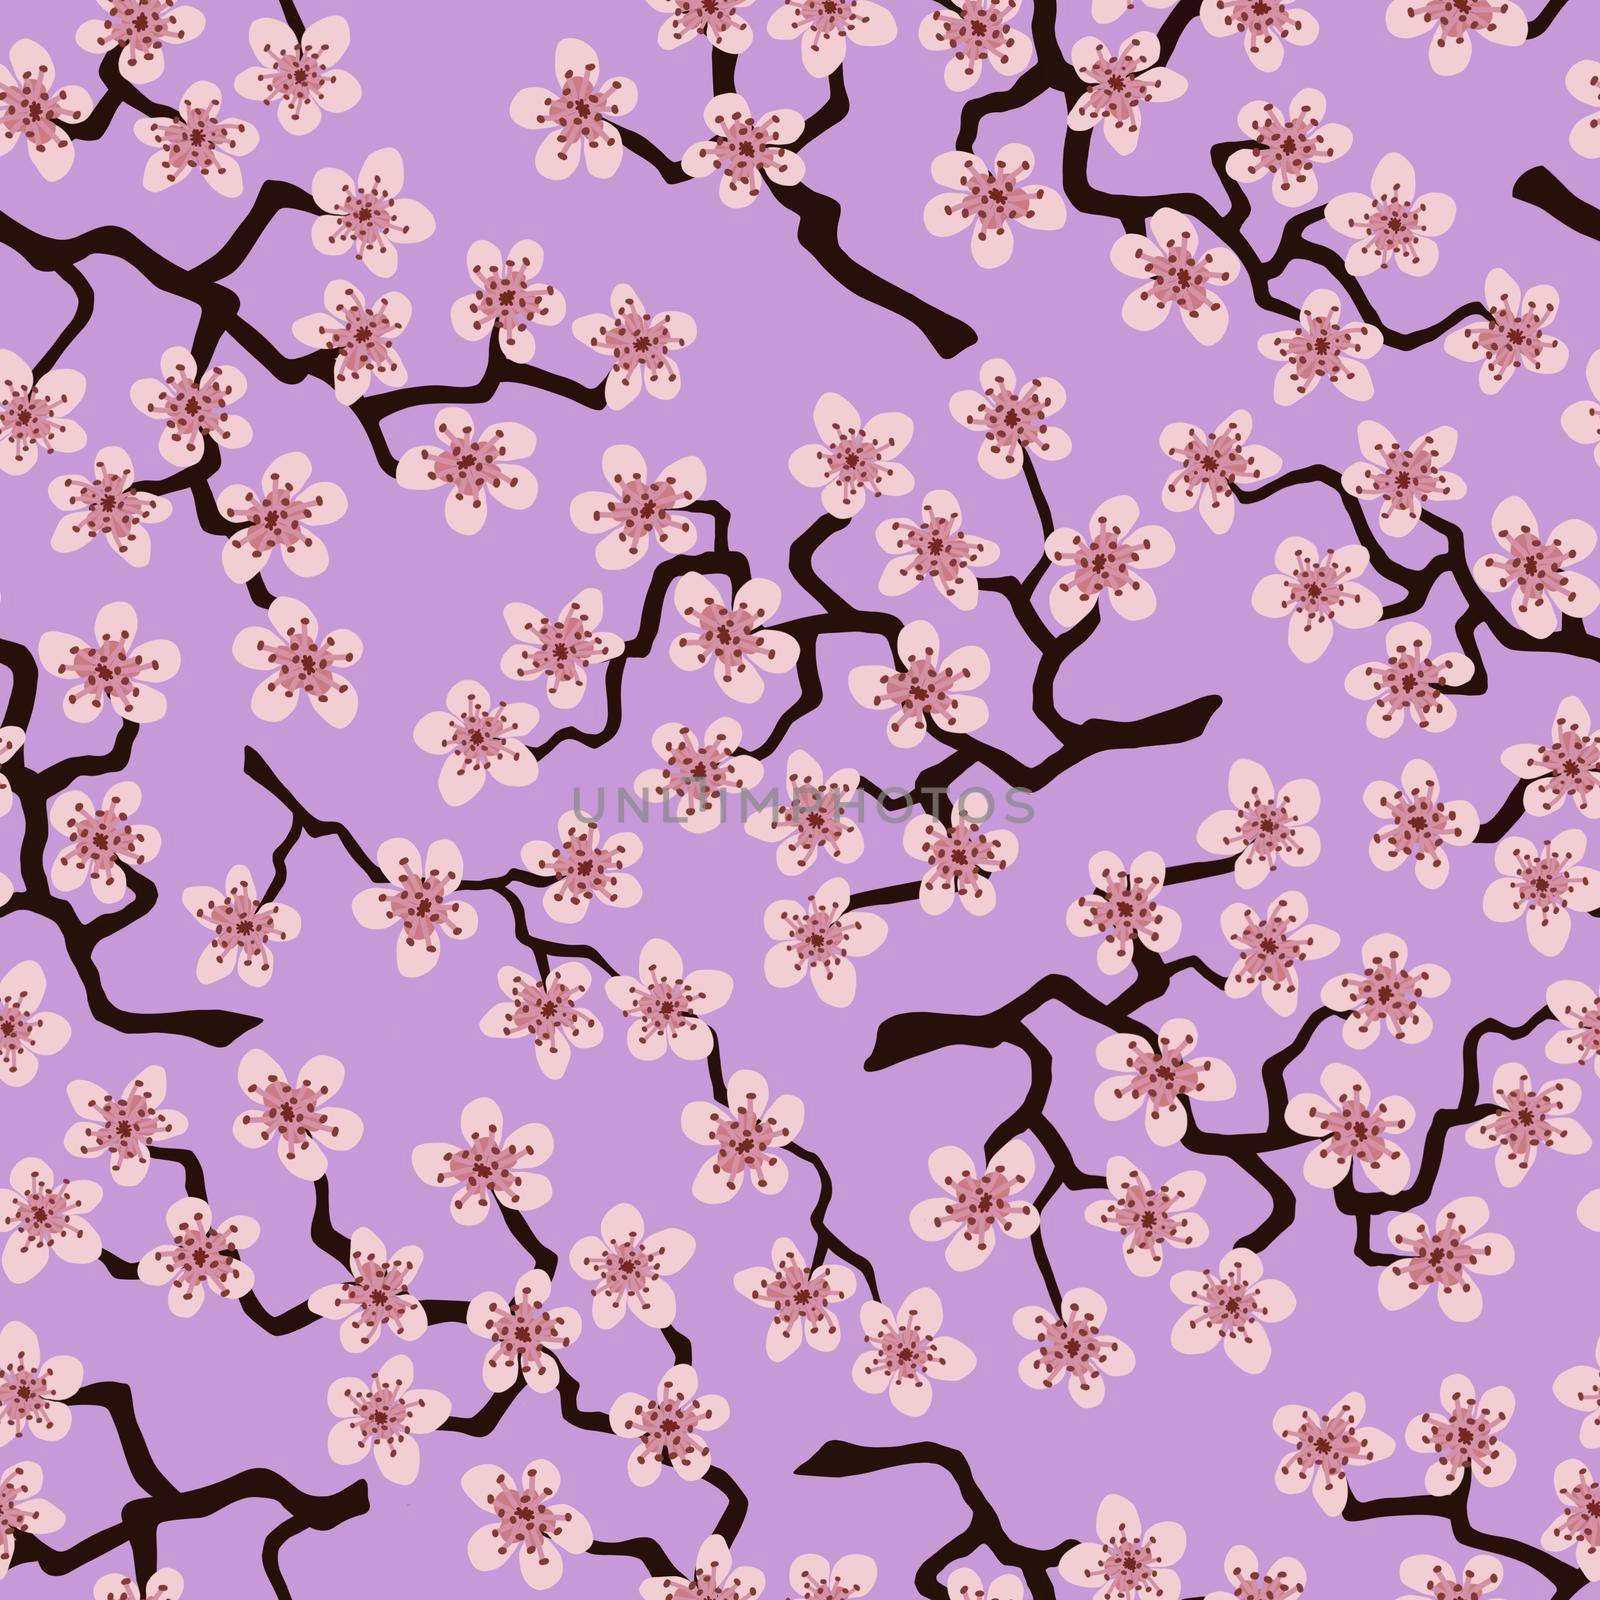 Seamless pattern with blossoming Japanese cherry sakura branches for fabric,packaging,wallpaper,t extile decor, design, invitations,print, gift wrap, manufacturing. Pink flowers on lavender background